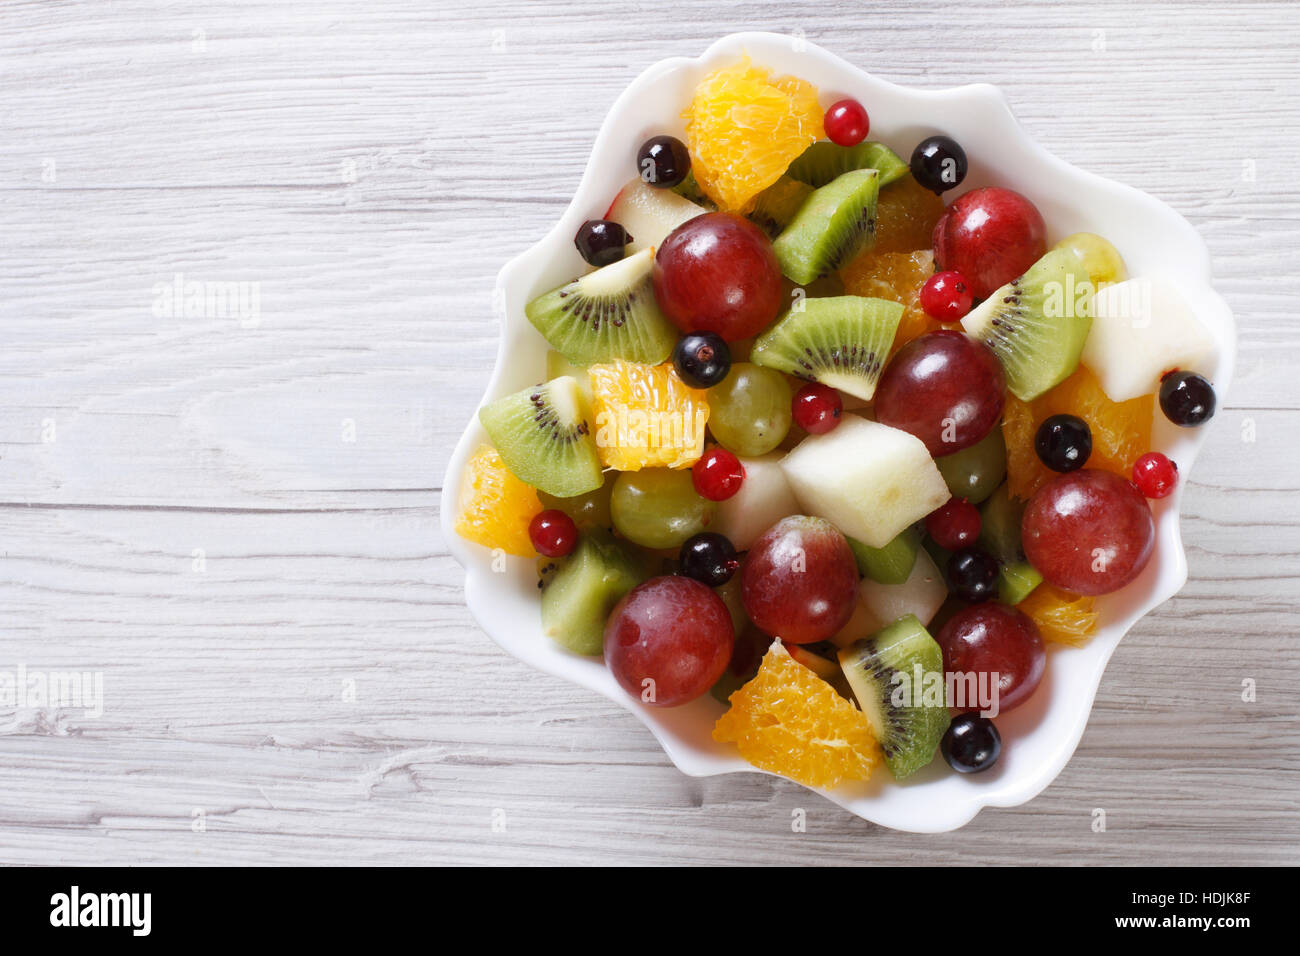 Fruit salad of oranges, grapes. pears, kiwi in white plate close up. horizontal view from above Stock Photo